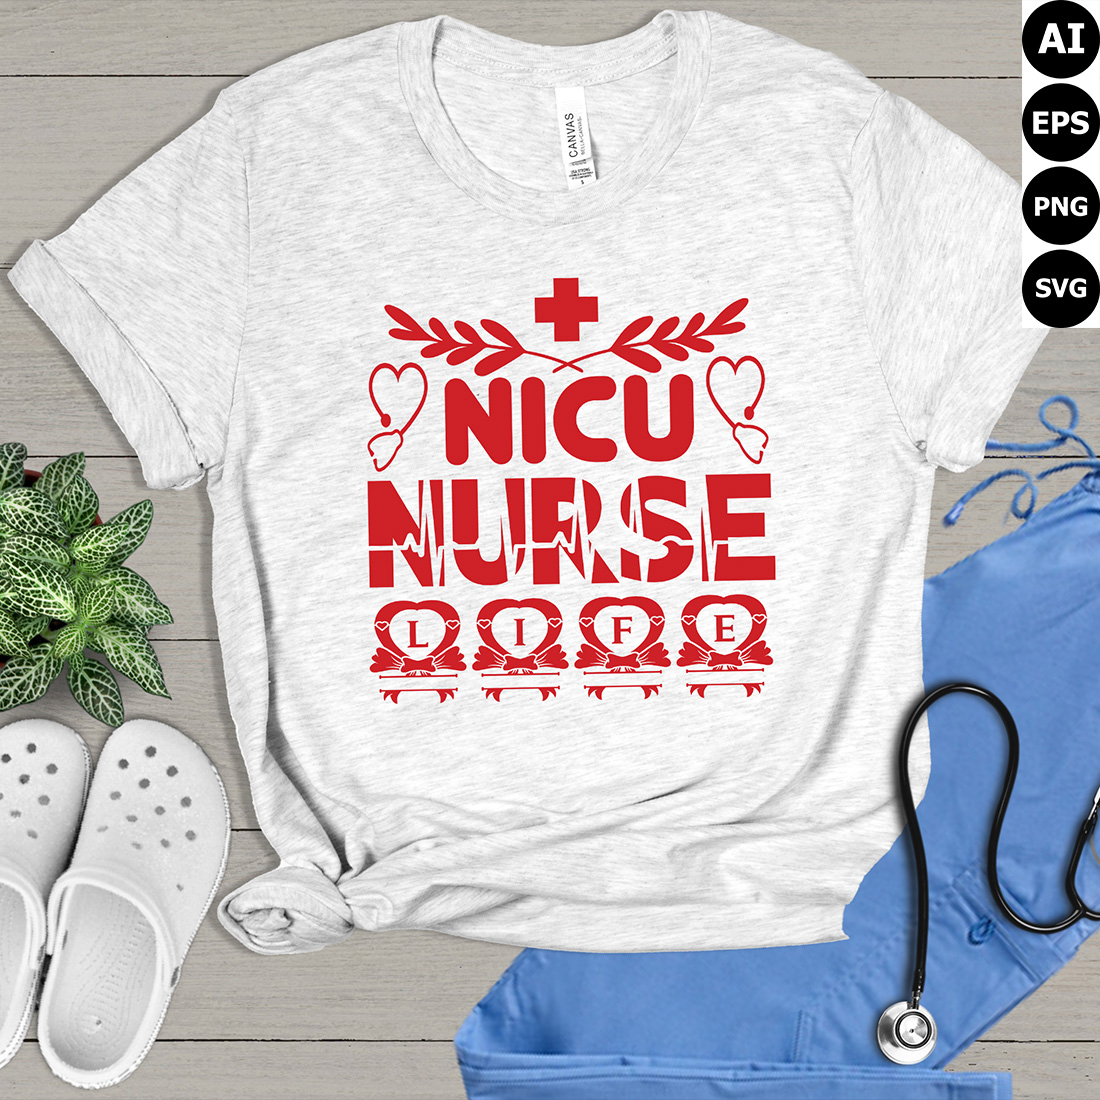 T - shirt with the words nicu nurse on it.